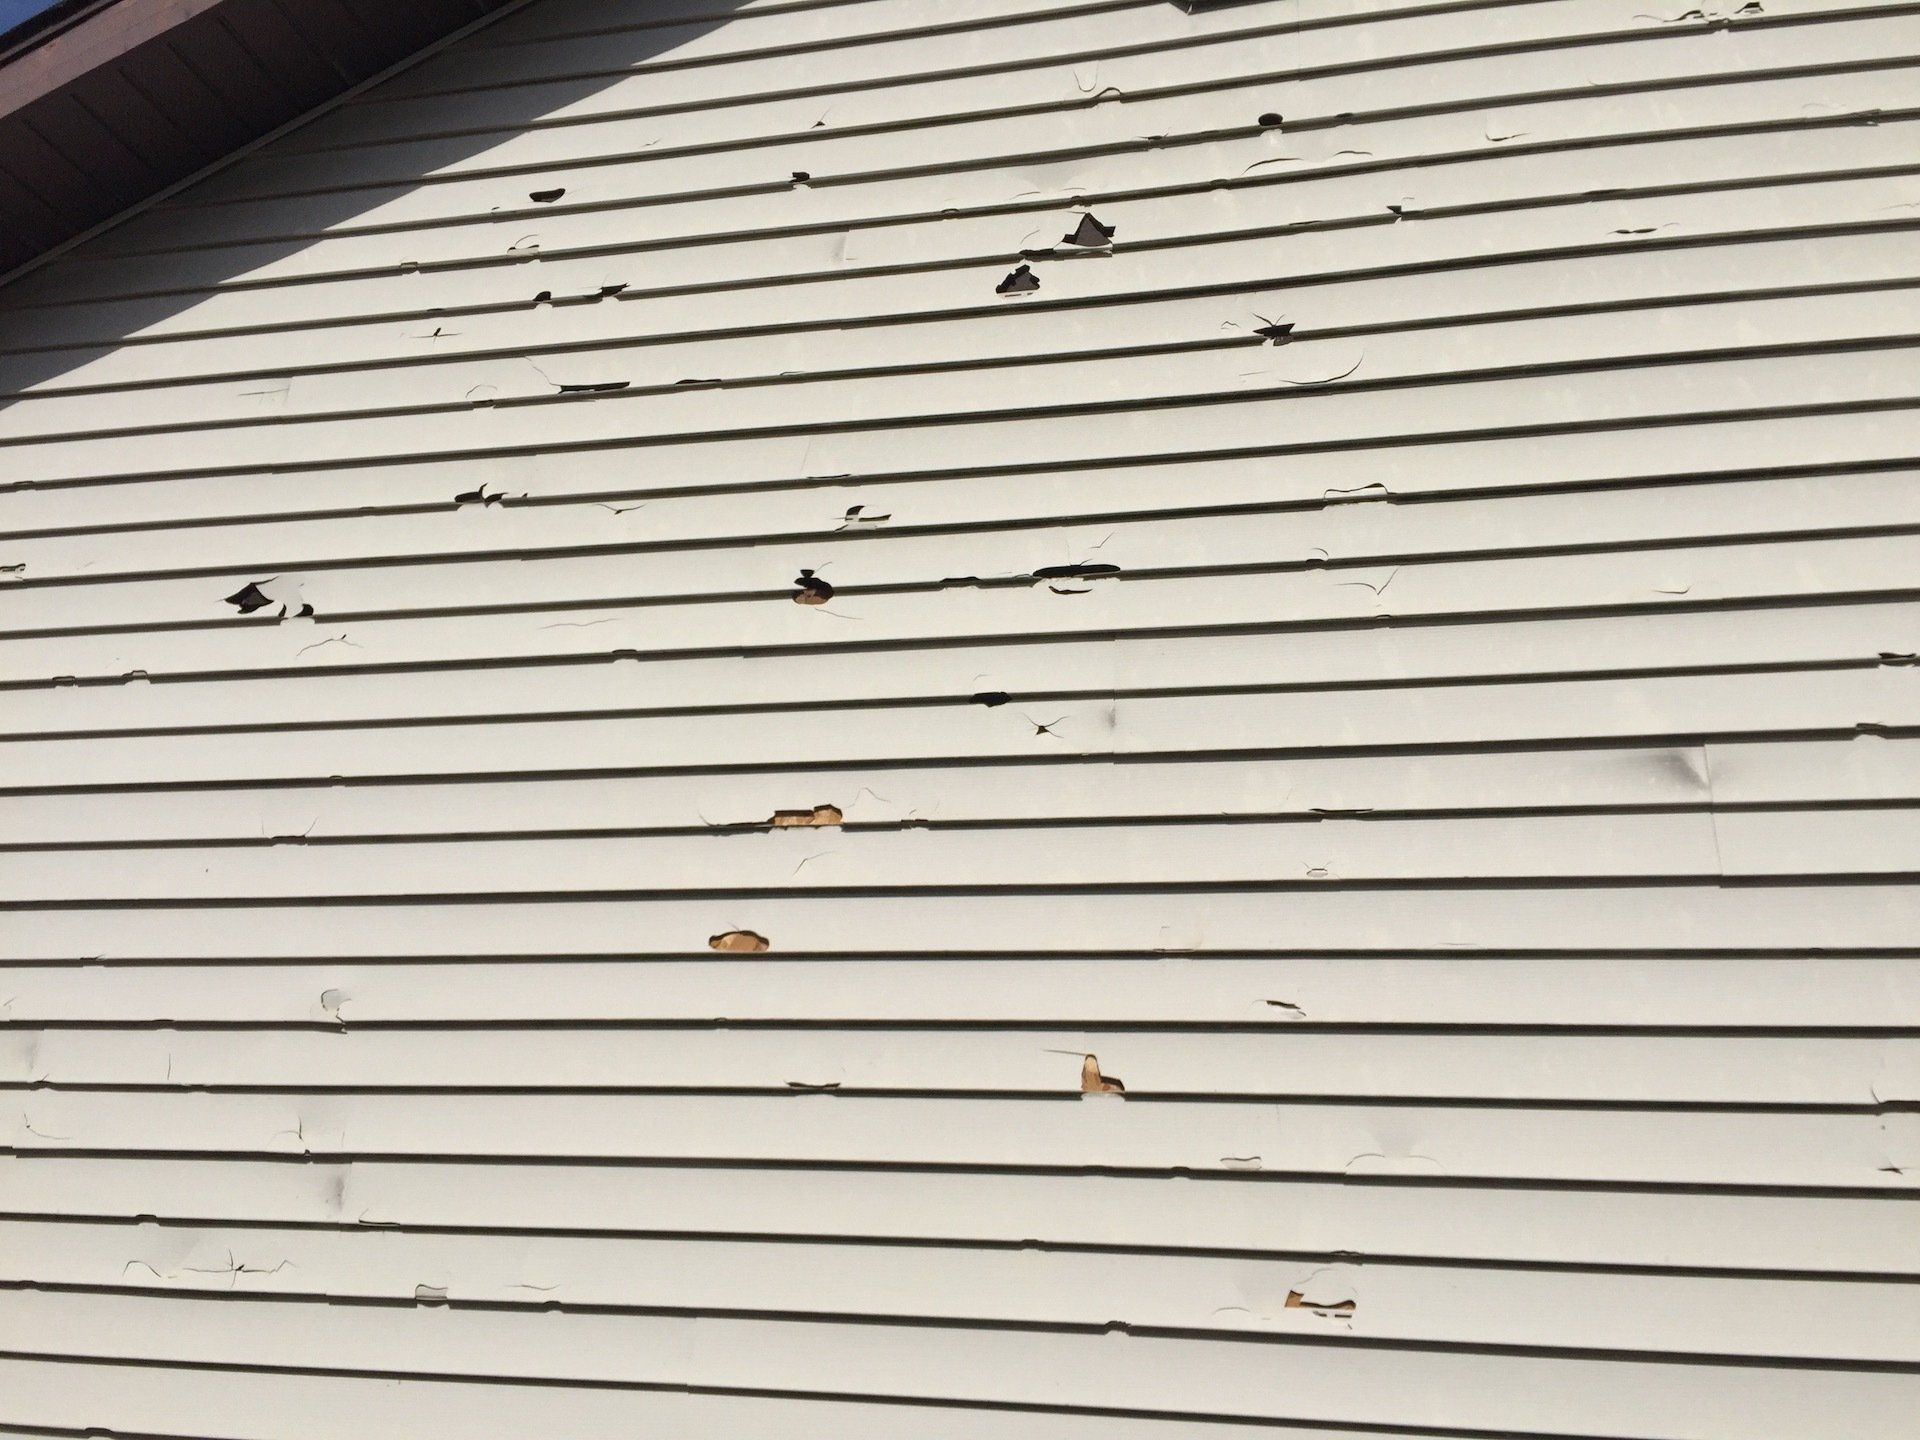 Extreme damage to siding of house after hailstorm